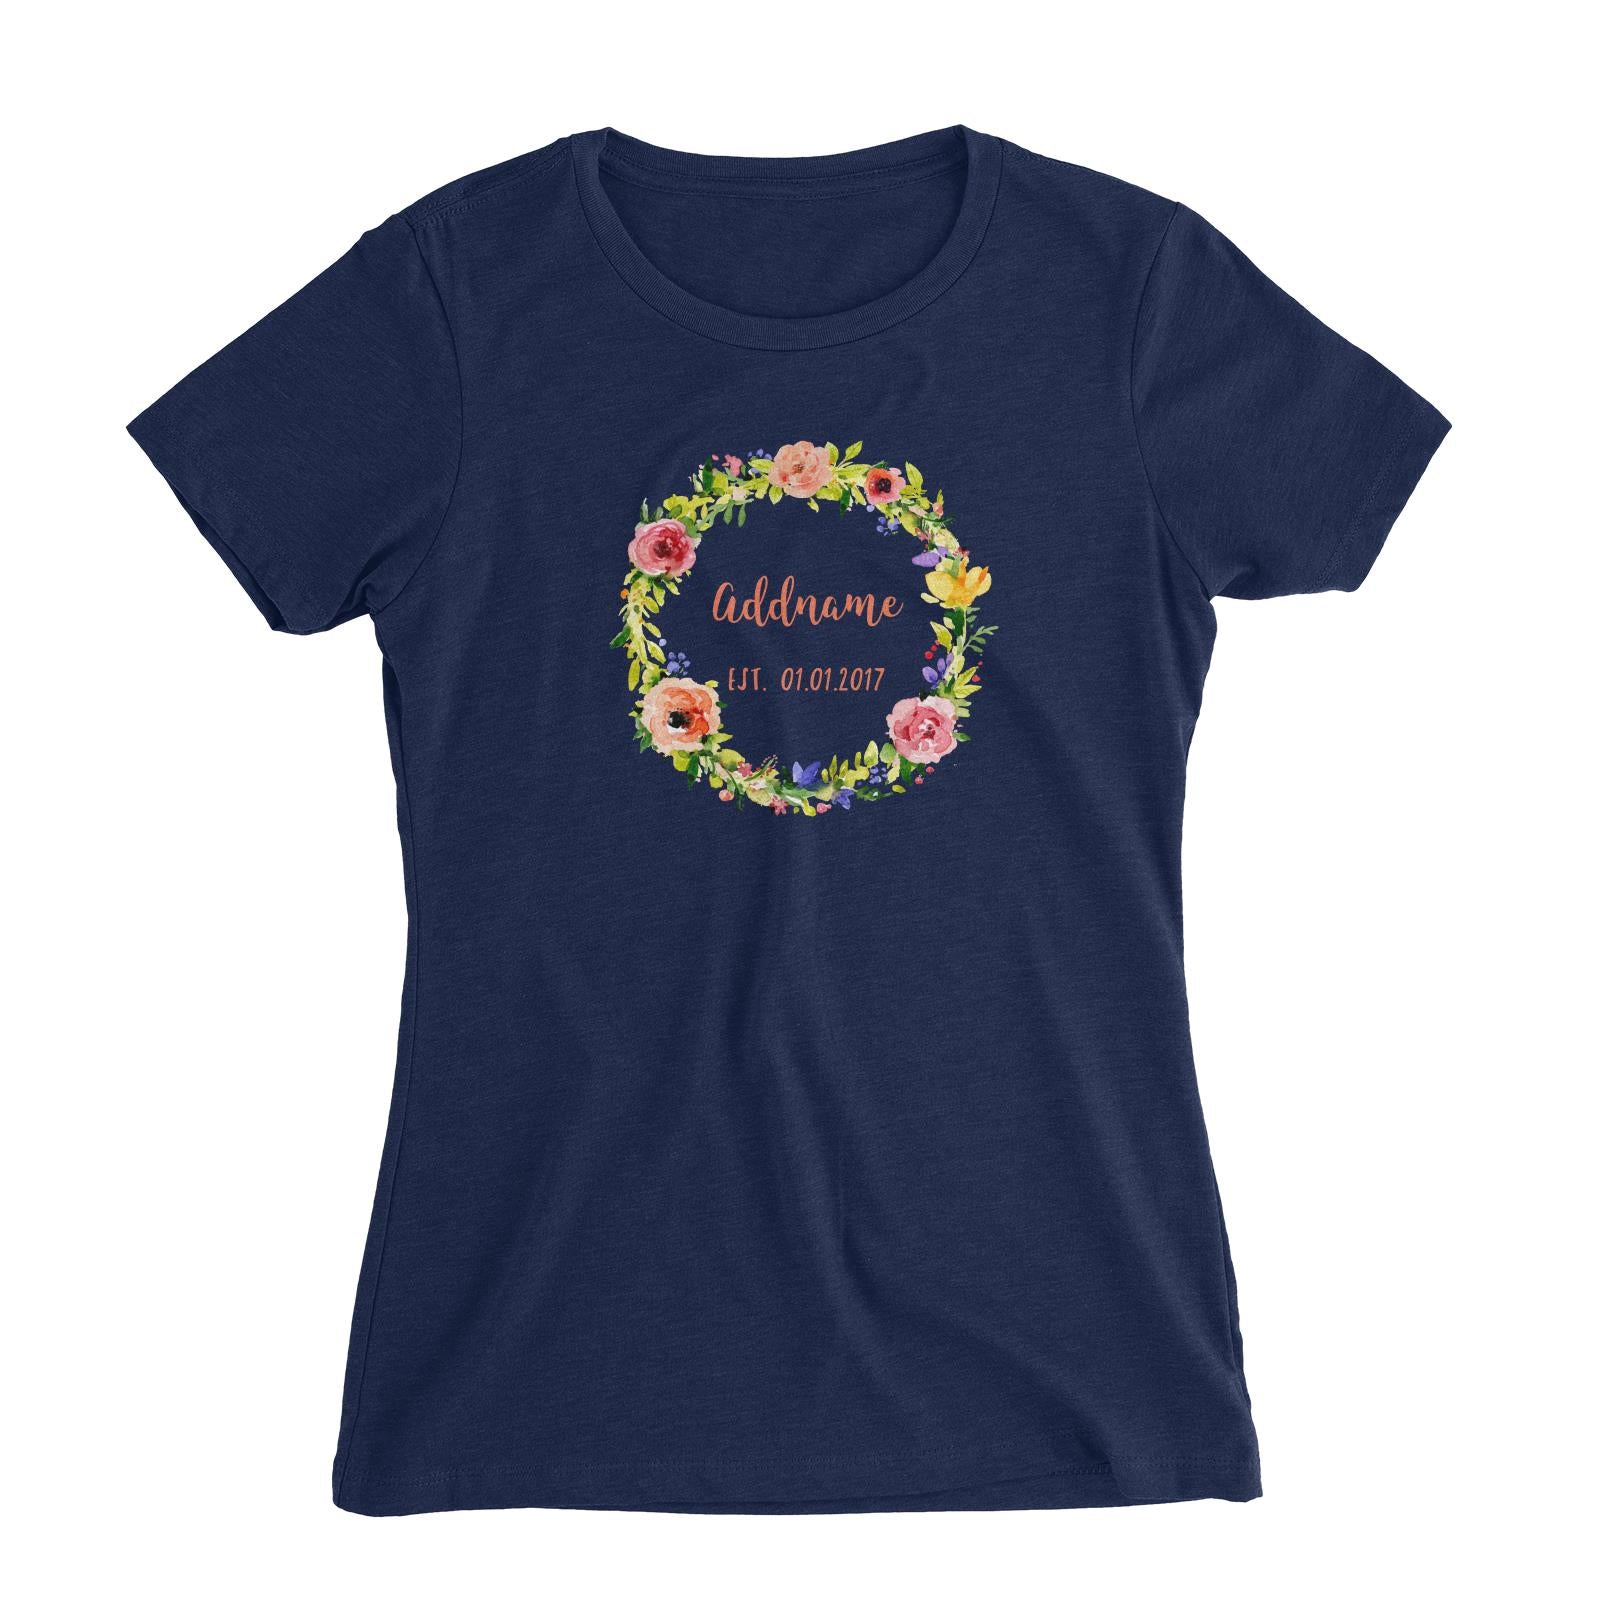 Add Name and Add Date in Spring Flower Wreath Women's Slim Fit T-Shirt